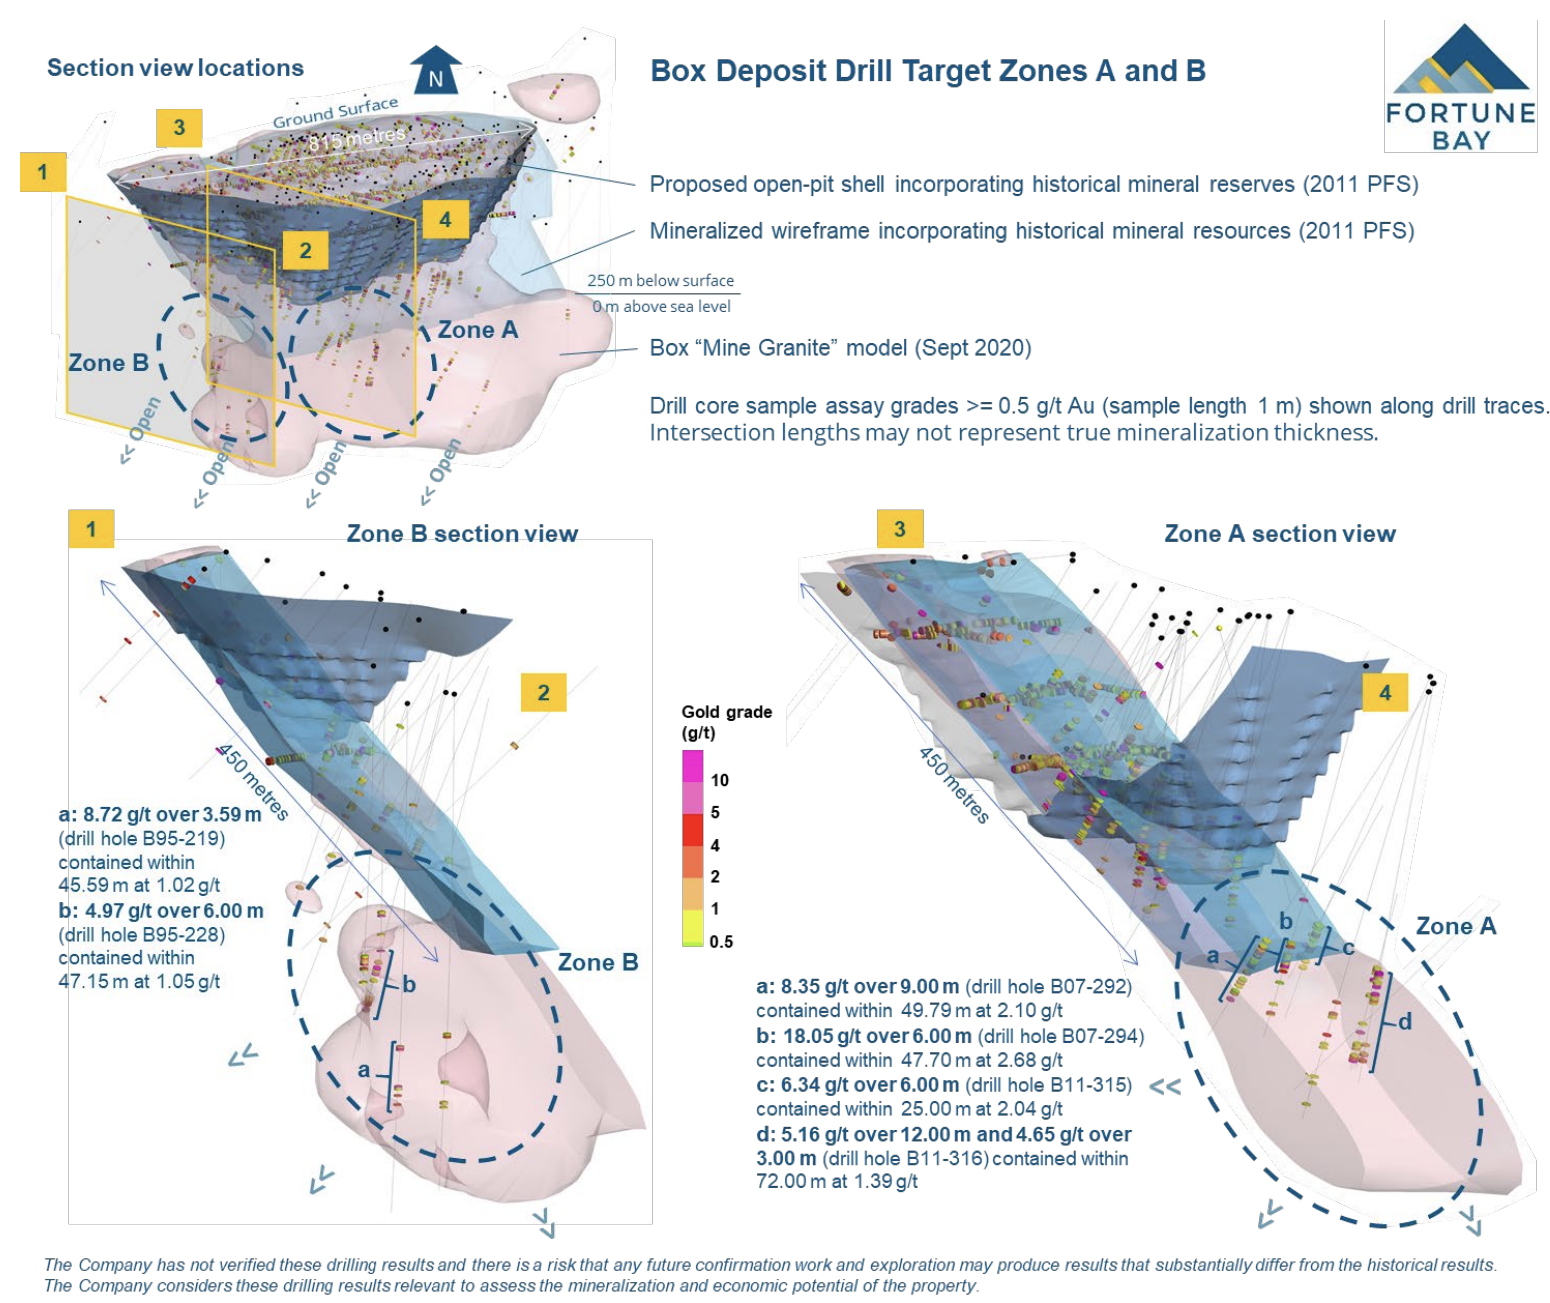 Figure 2 Box Deposit Drill Target Zones A and B